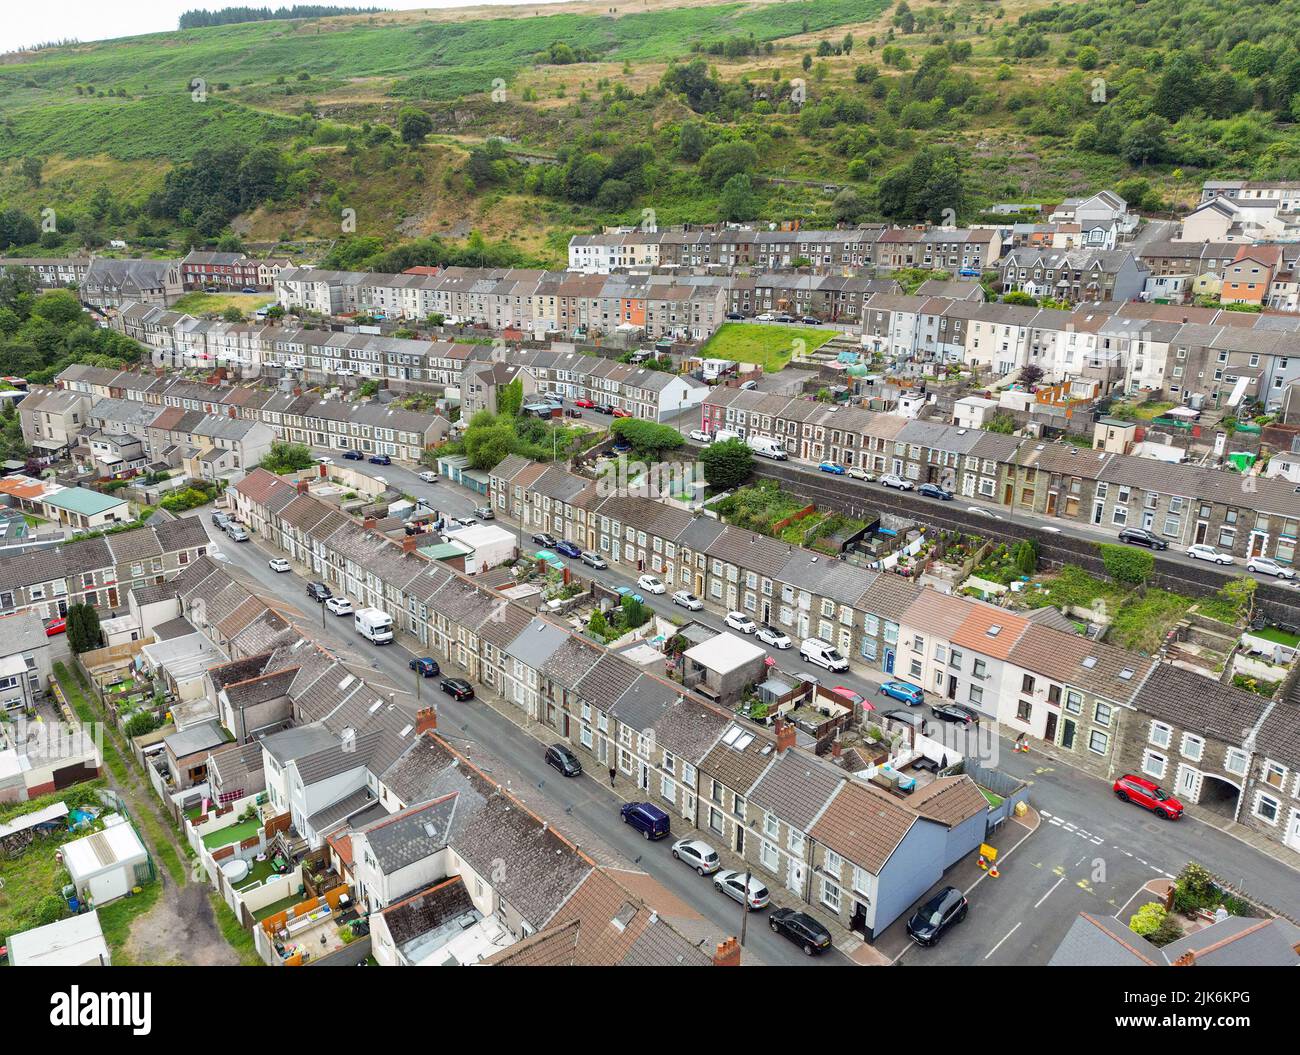 Ferndale, Rhondda Valley, Wales - July 2022: Aerial view of terraced houses in the village of Ferndale in the Rhondda Fach valley in south Wales Stock Photo